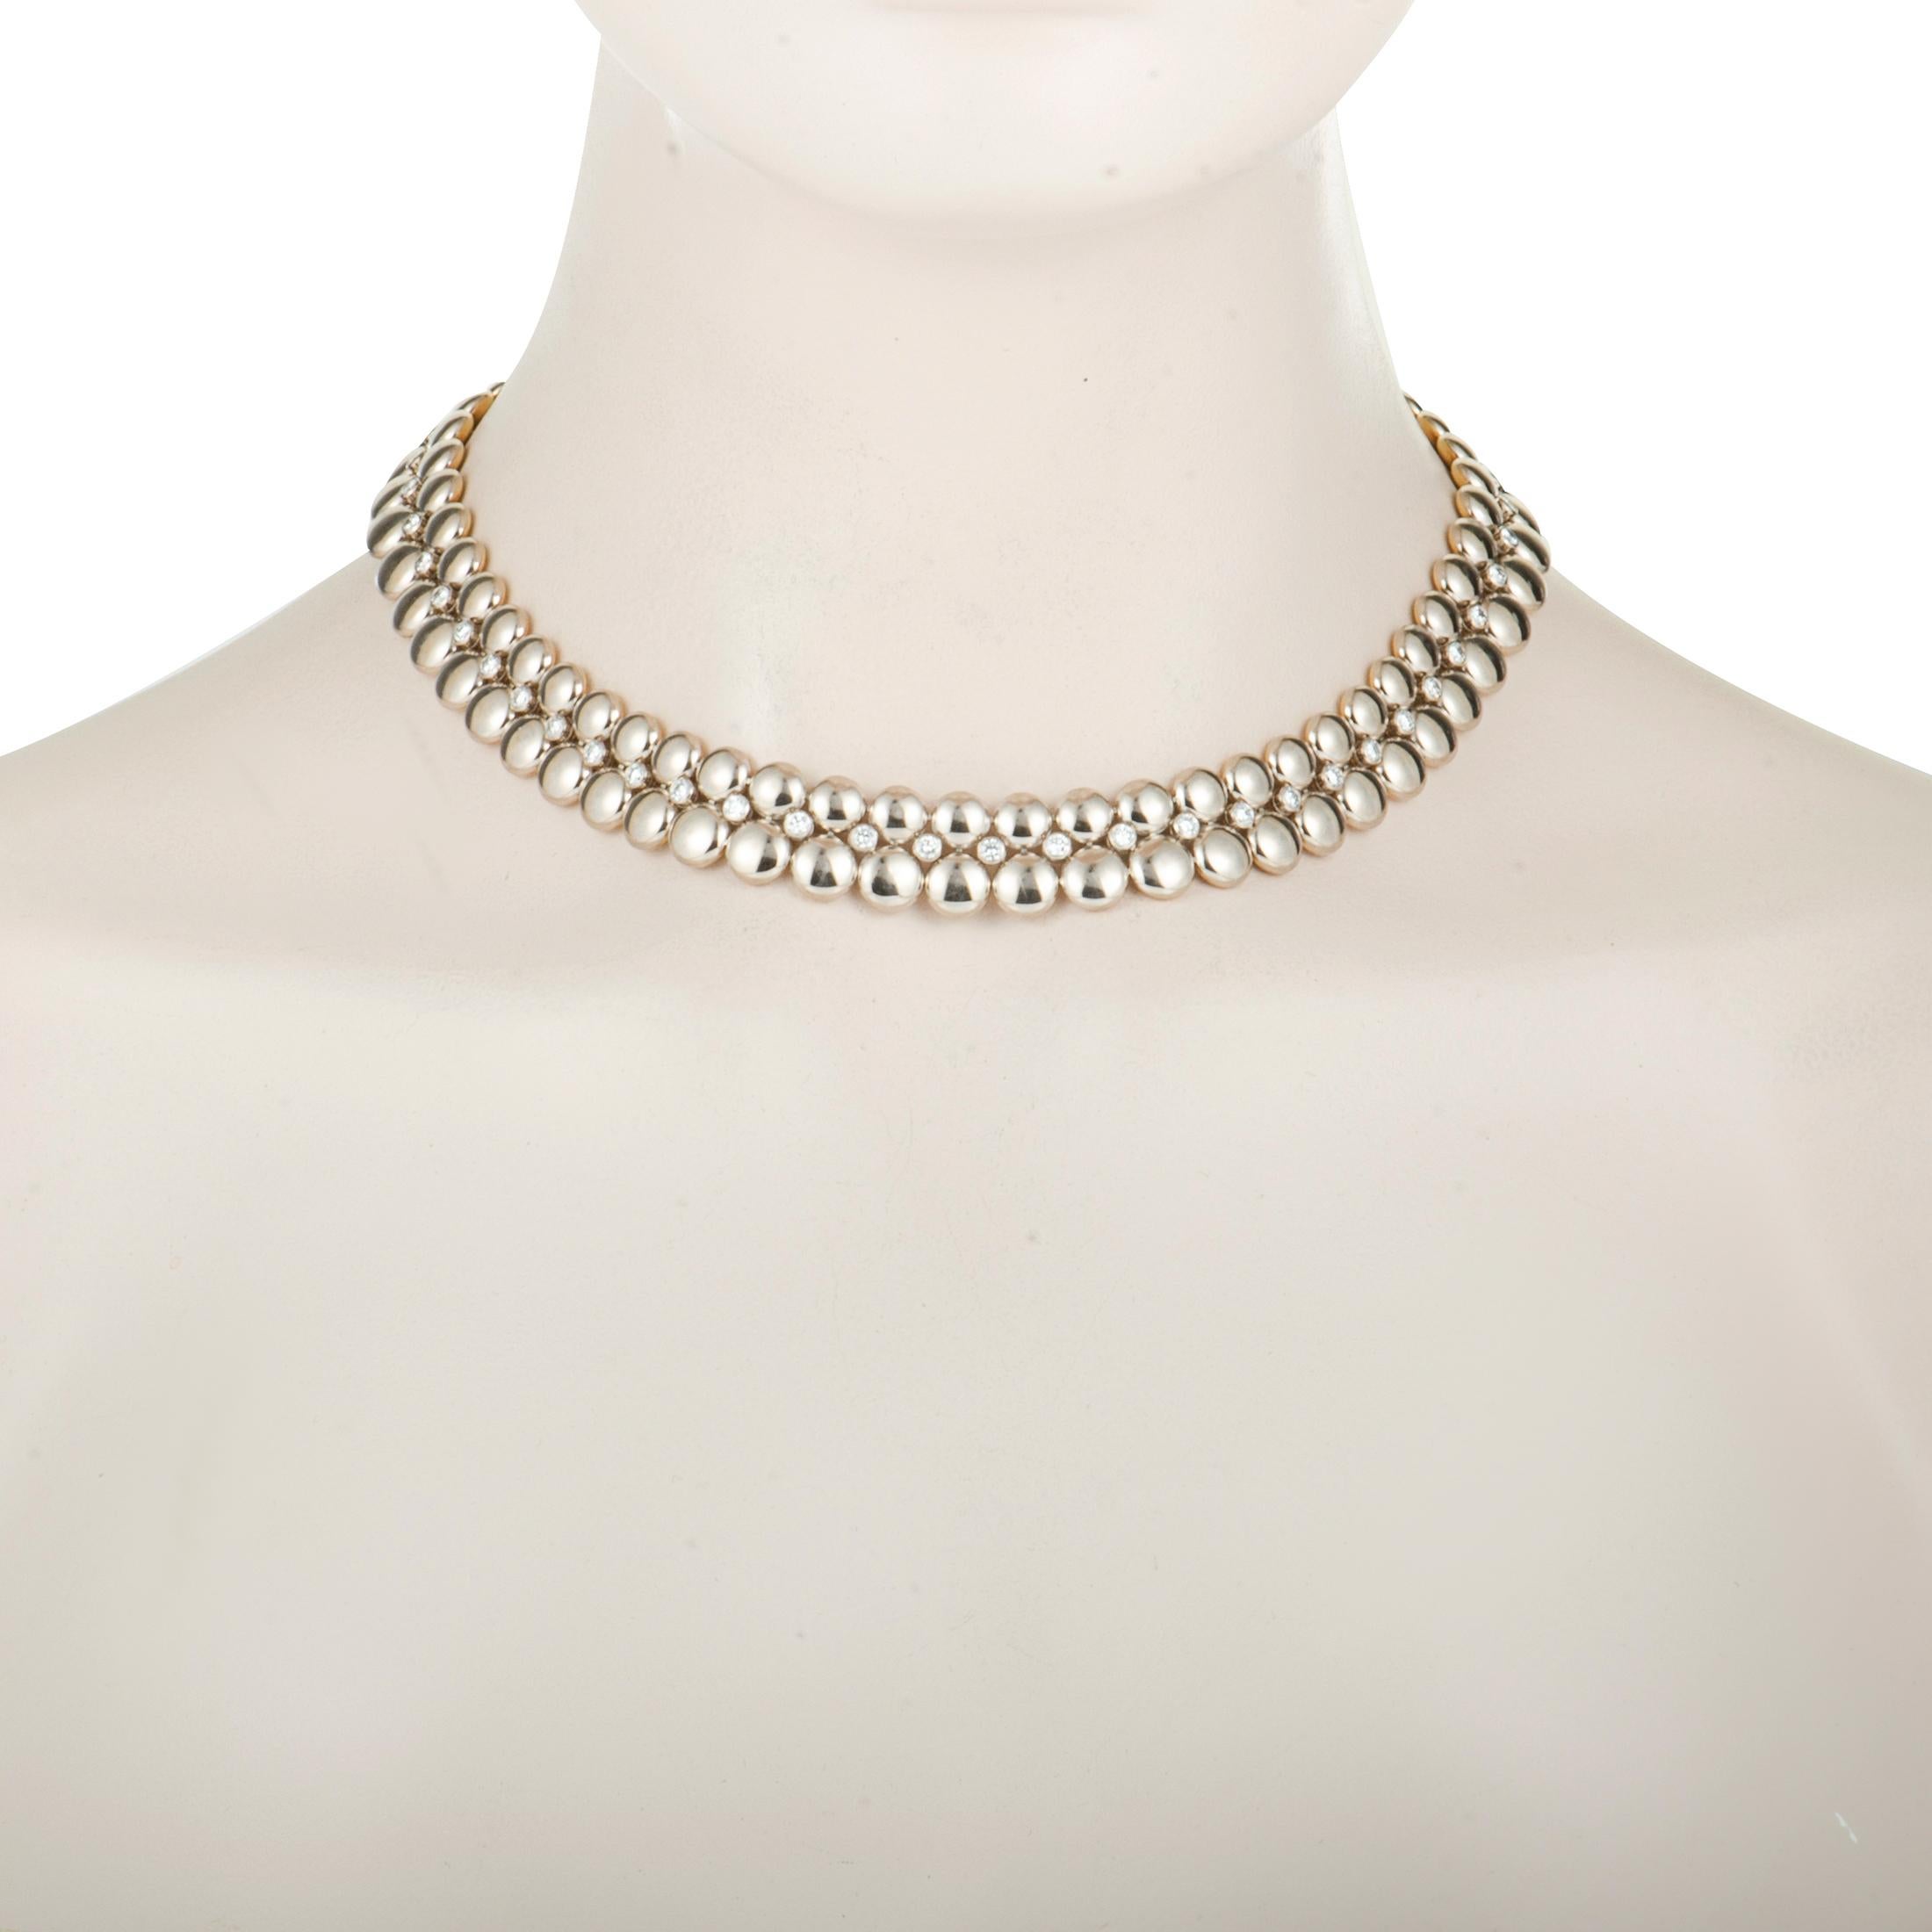 Women's Cartier 18K White & Yellow Gold Diamond 2-row Beaded Inside Out Collar Necklace